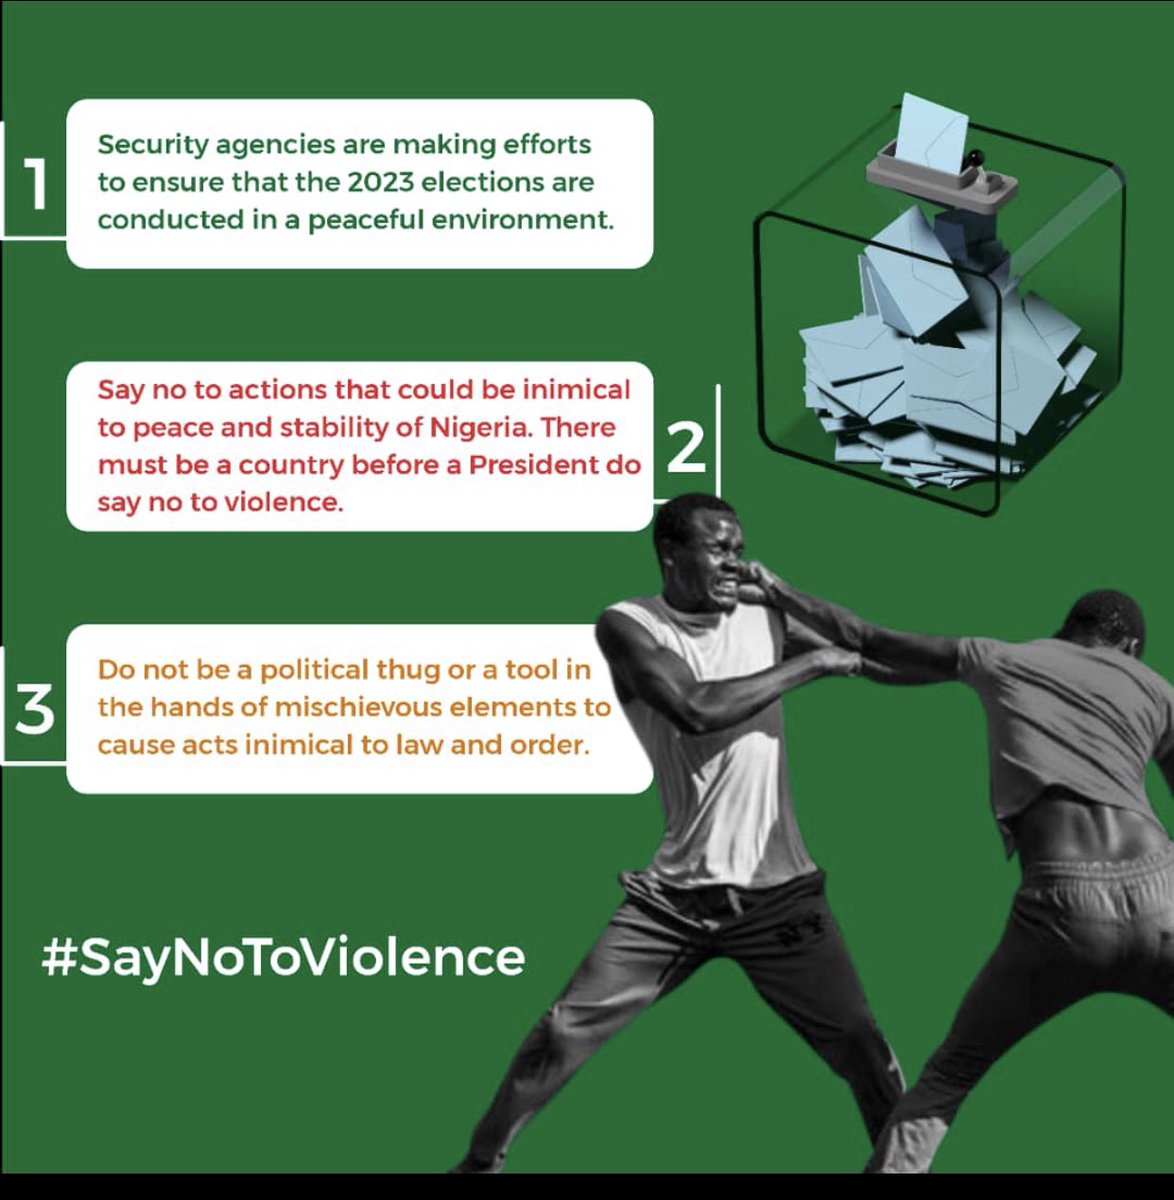 VOTE not FIGHT cause election no be WAR. 

#Vote4Peace #SayNoToViolence